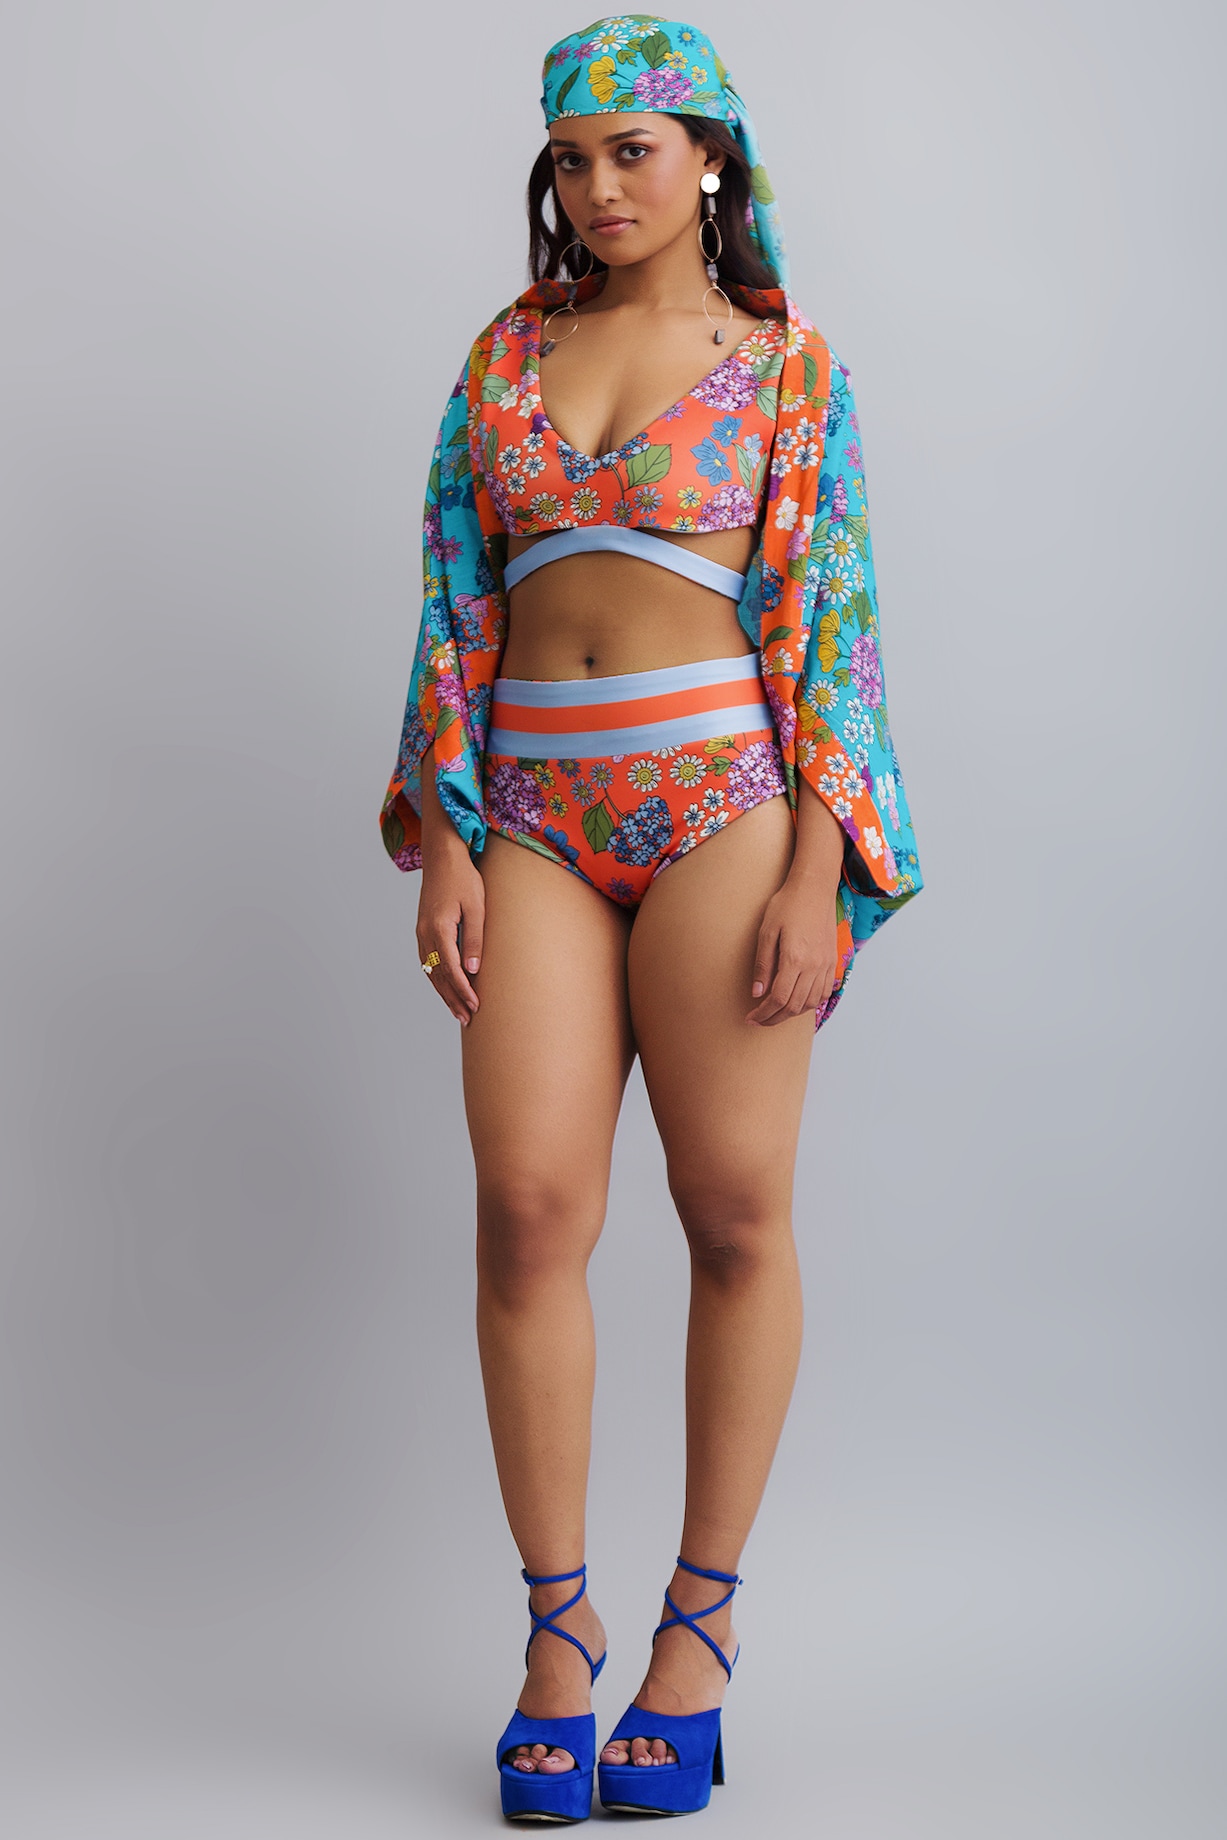 Dallas designer launches uplifting swimwear for women with itty